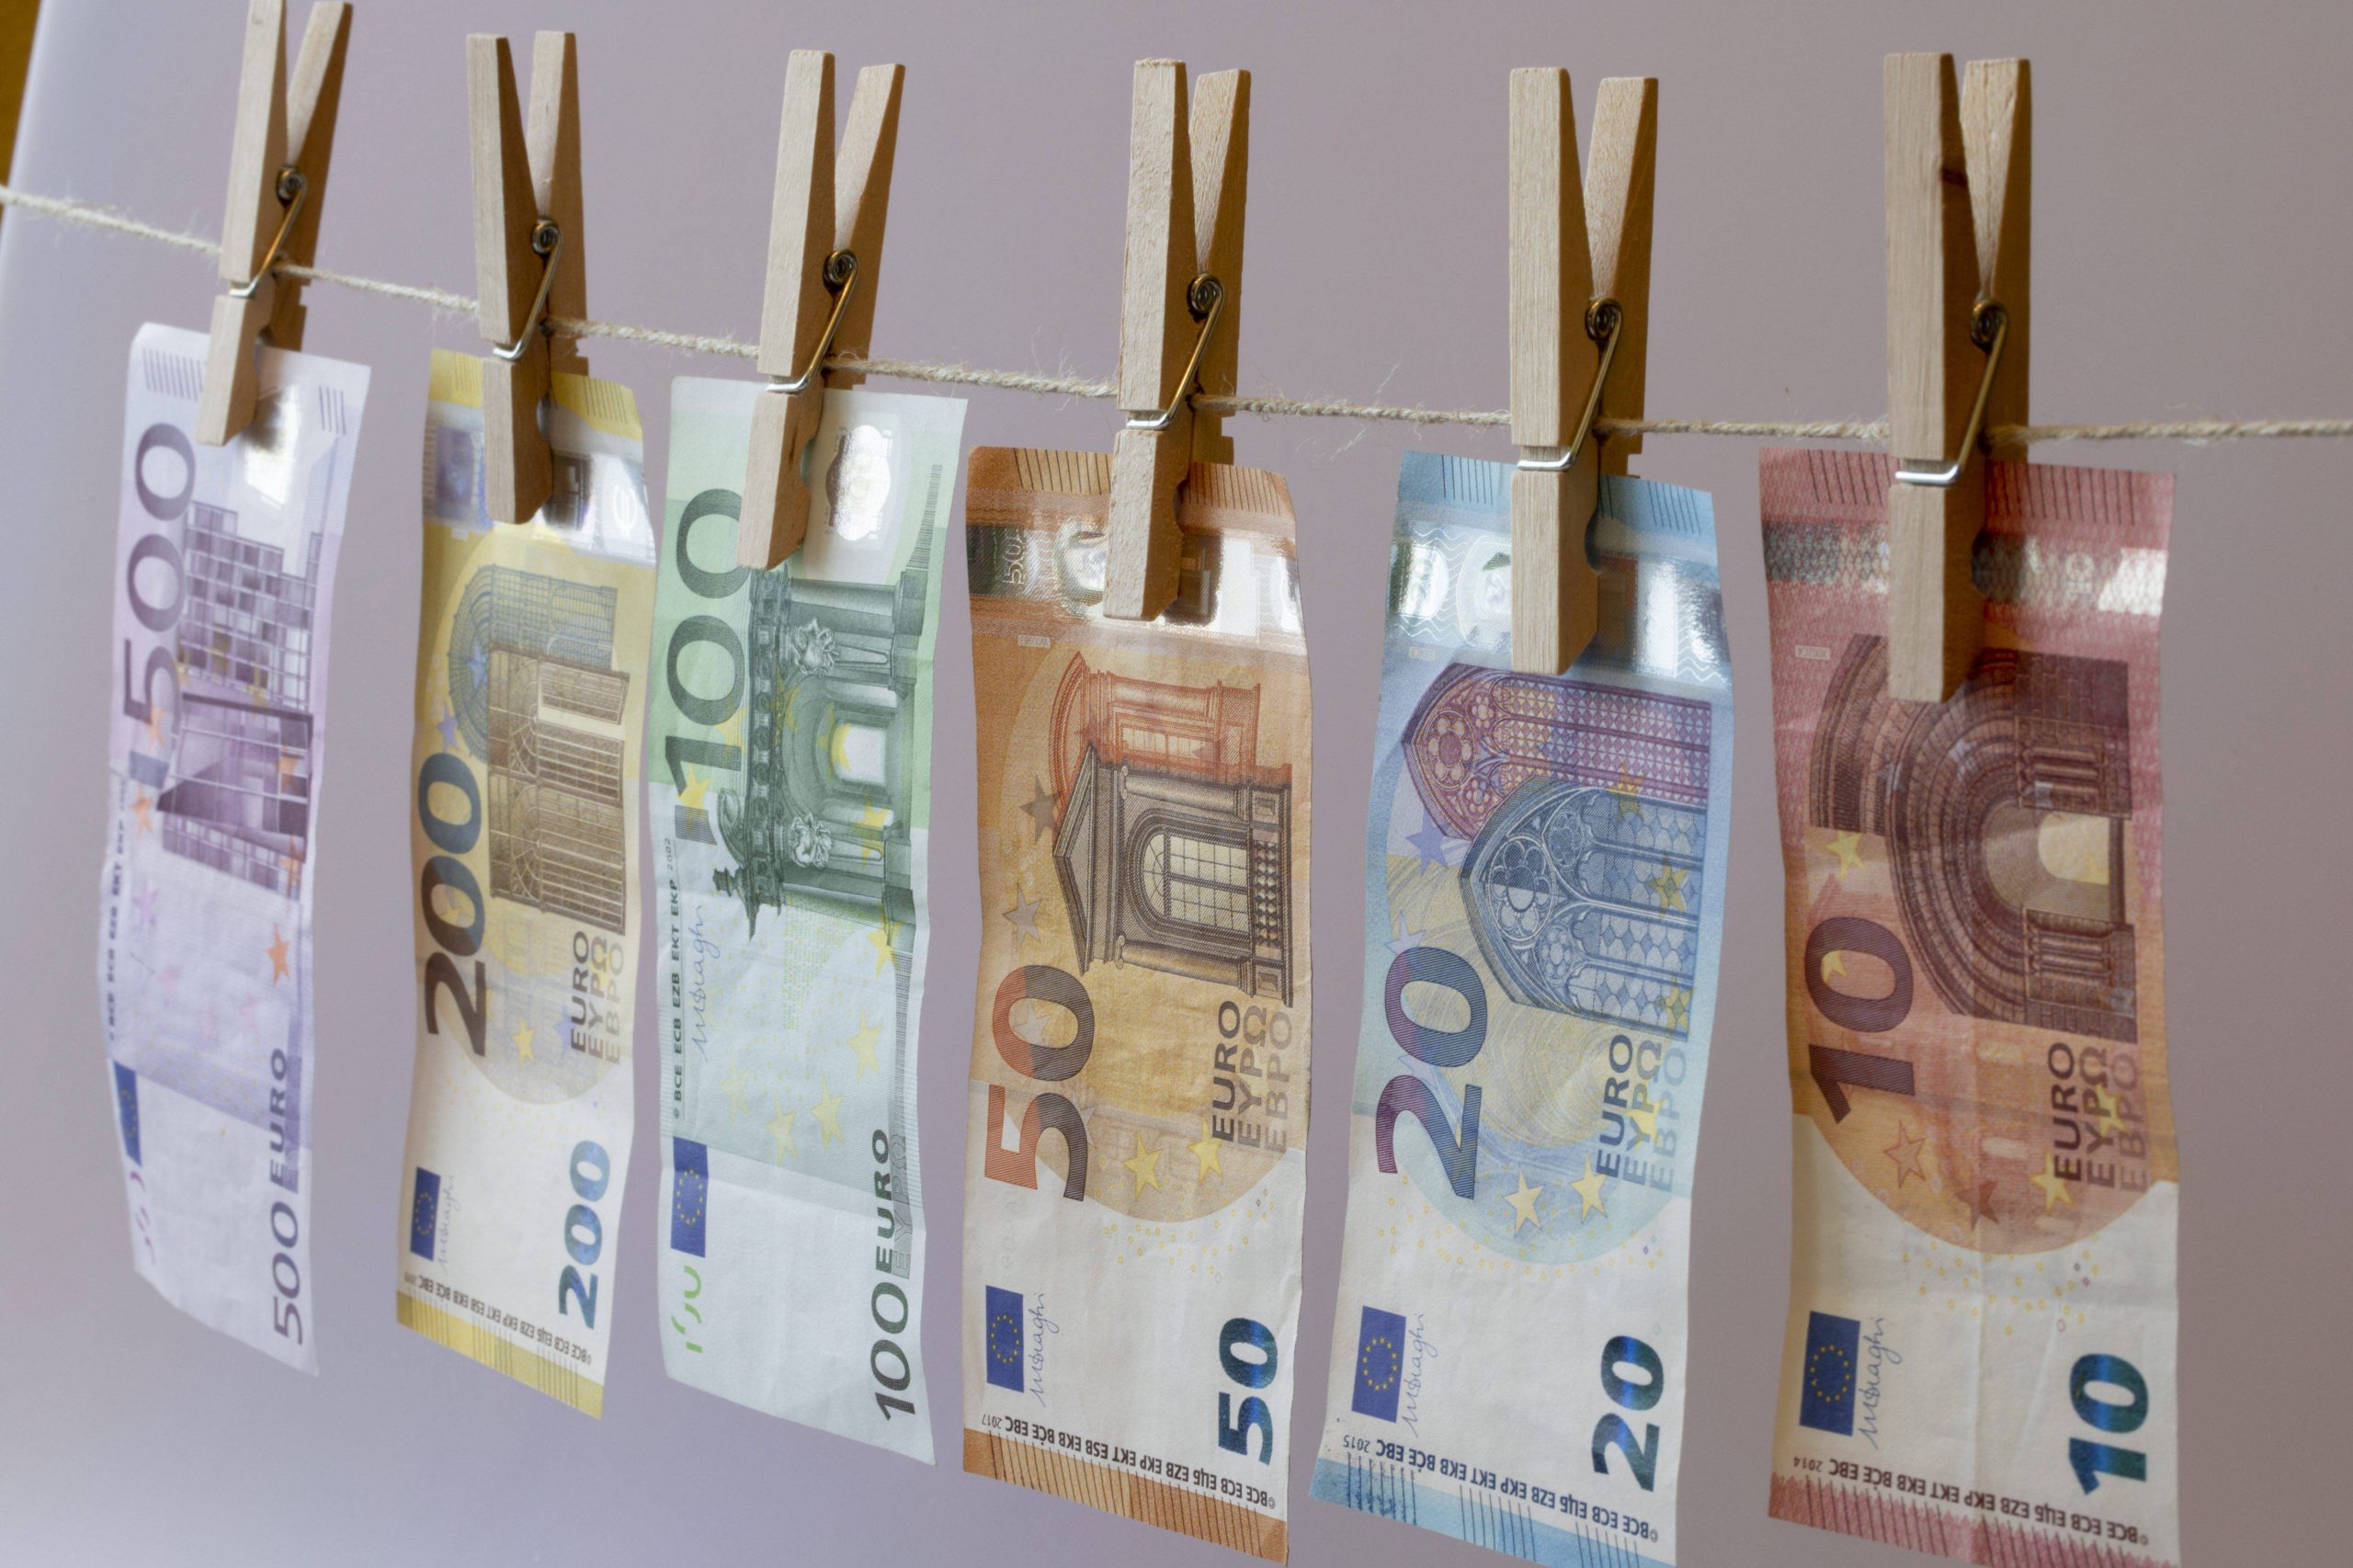 Five arrested in Malaga, Cadiz and Ceuta in an operation against money laundering from drug trafficking in Spain